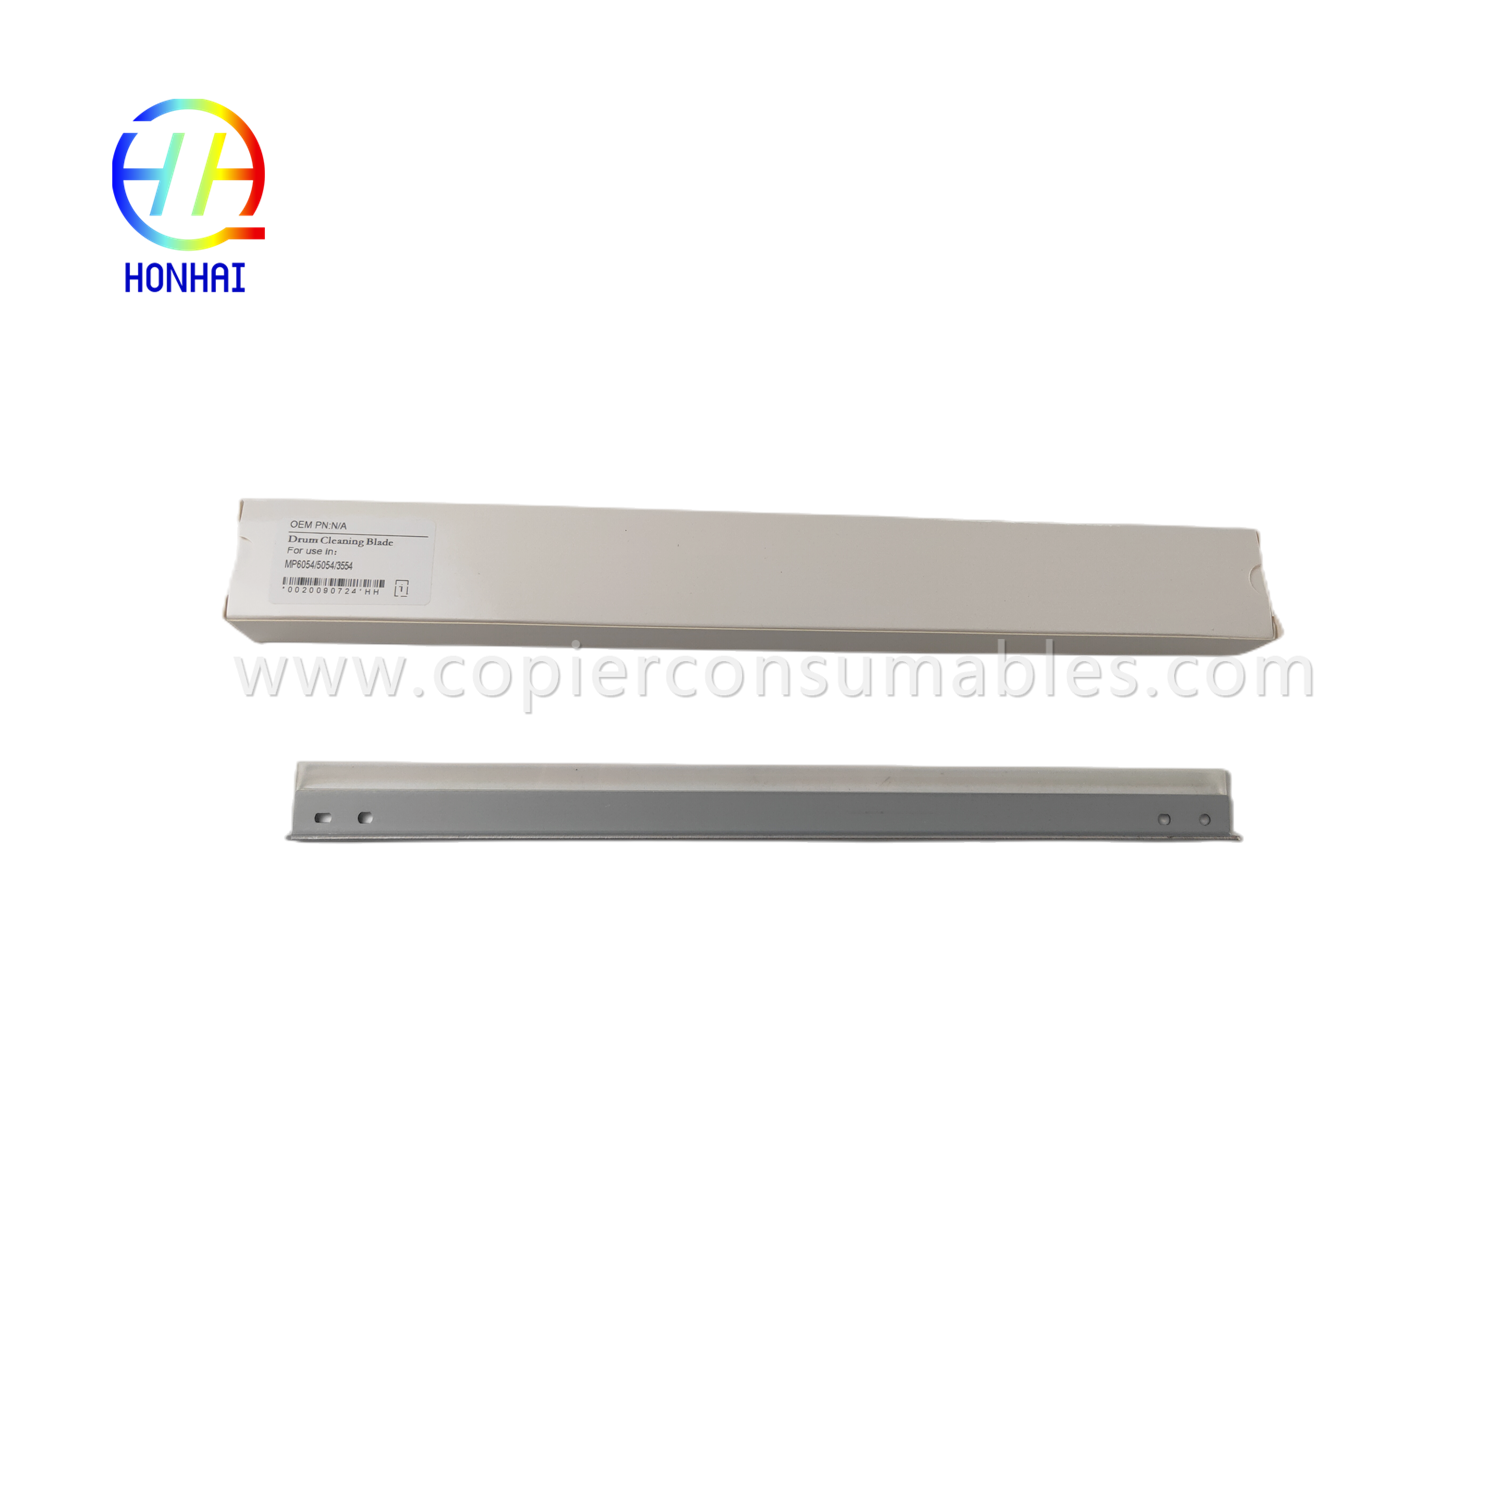 https://c585.goodo.net/drum-cleaning-blade-for-ricoh-mp-2554-3054-3554-4054-5054-6054-ምርት/